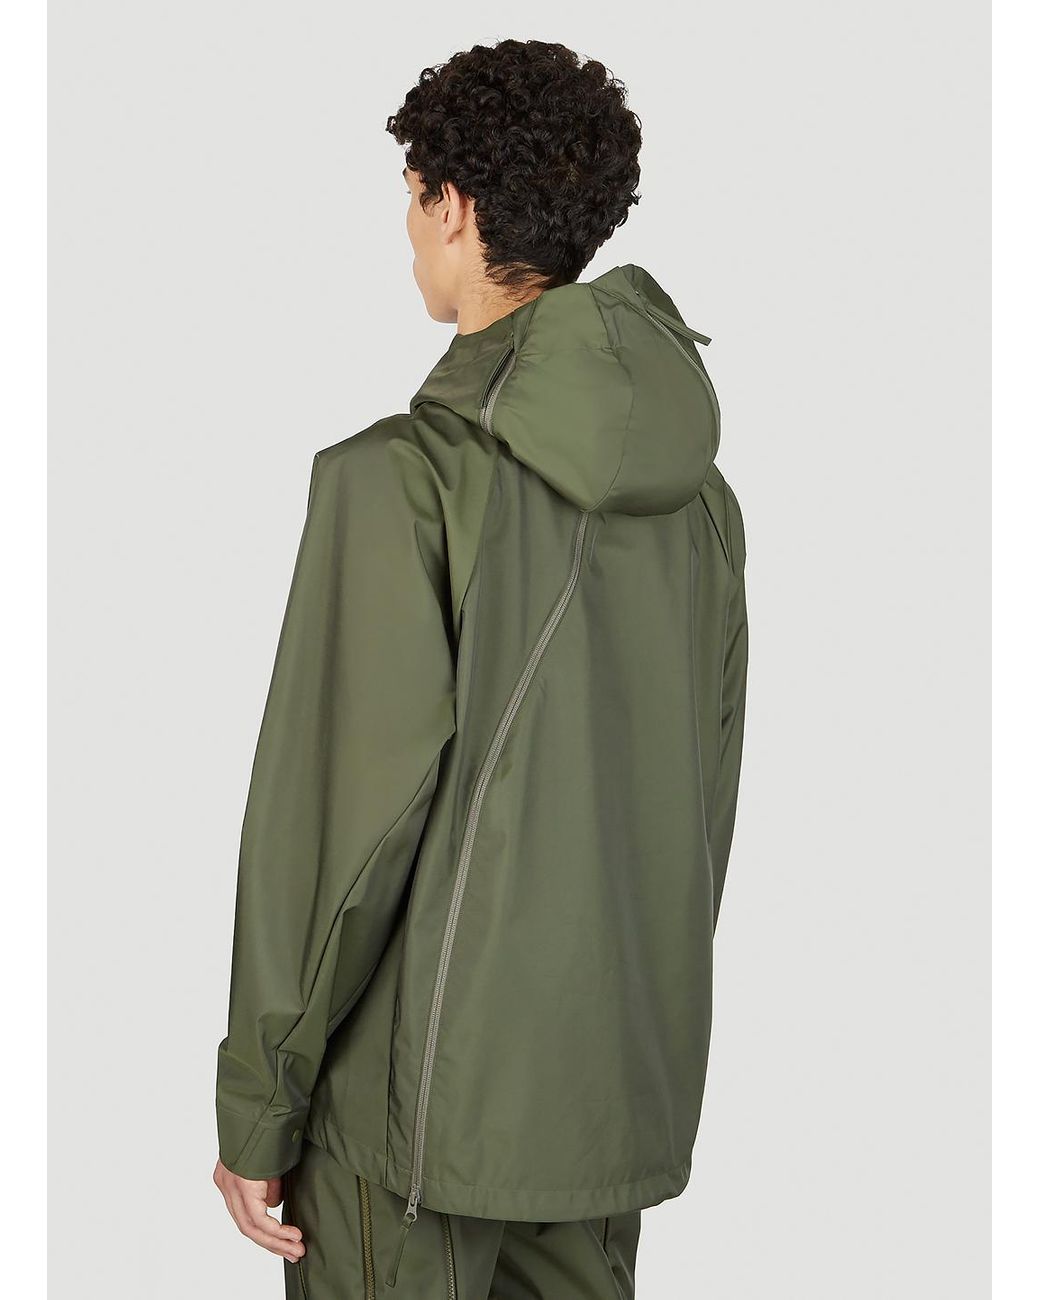 Post Archive Faction PAF 5.0 Technical Jacket Center in Green for